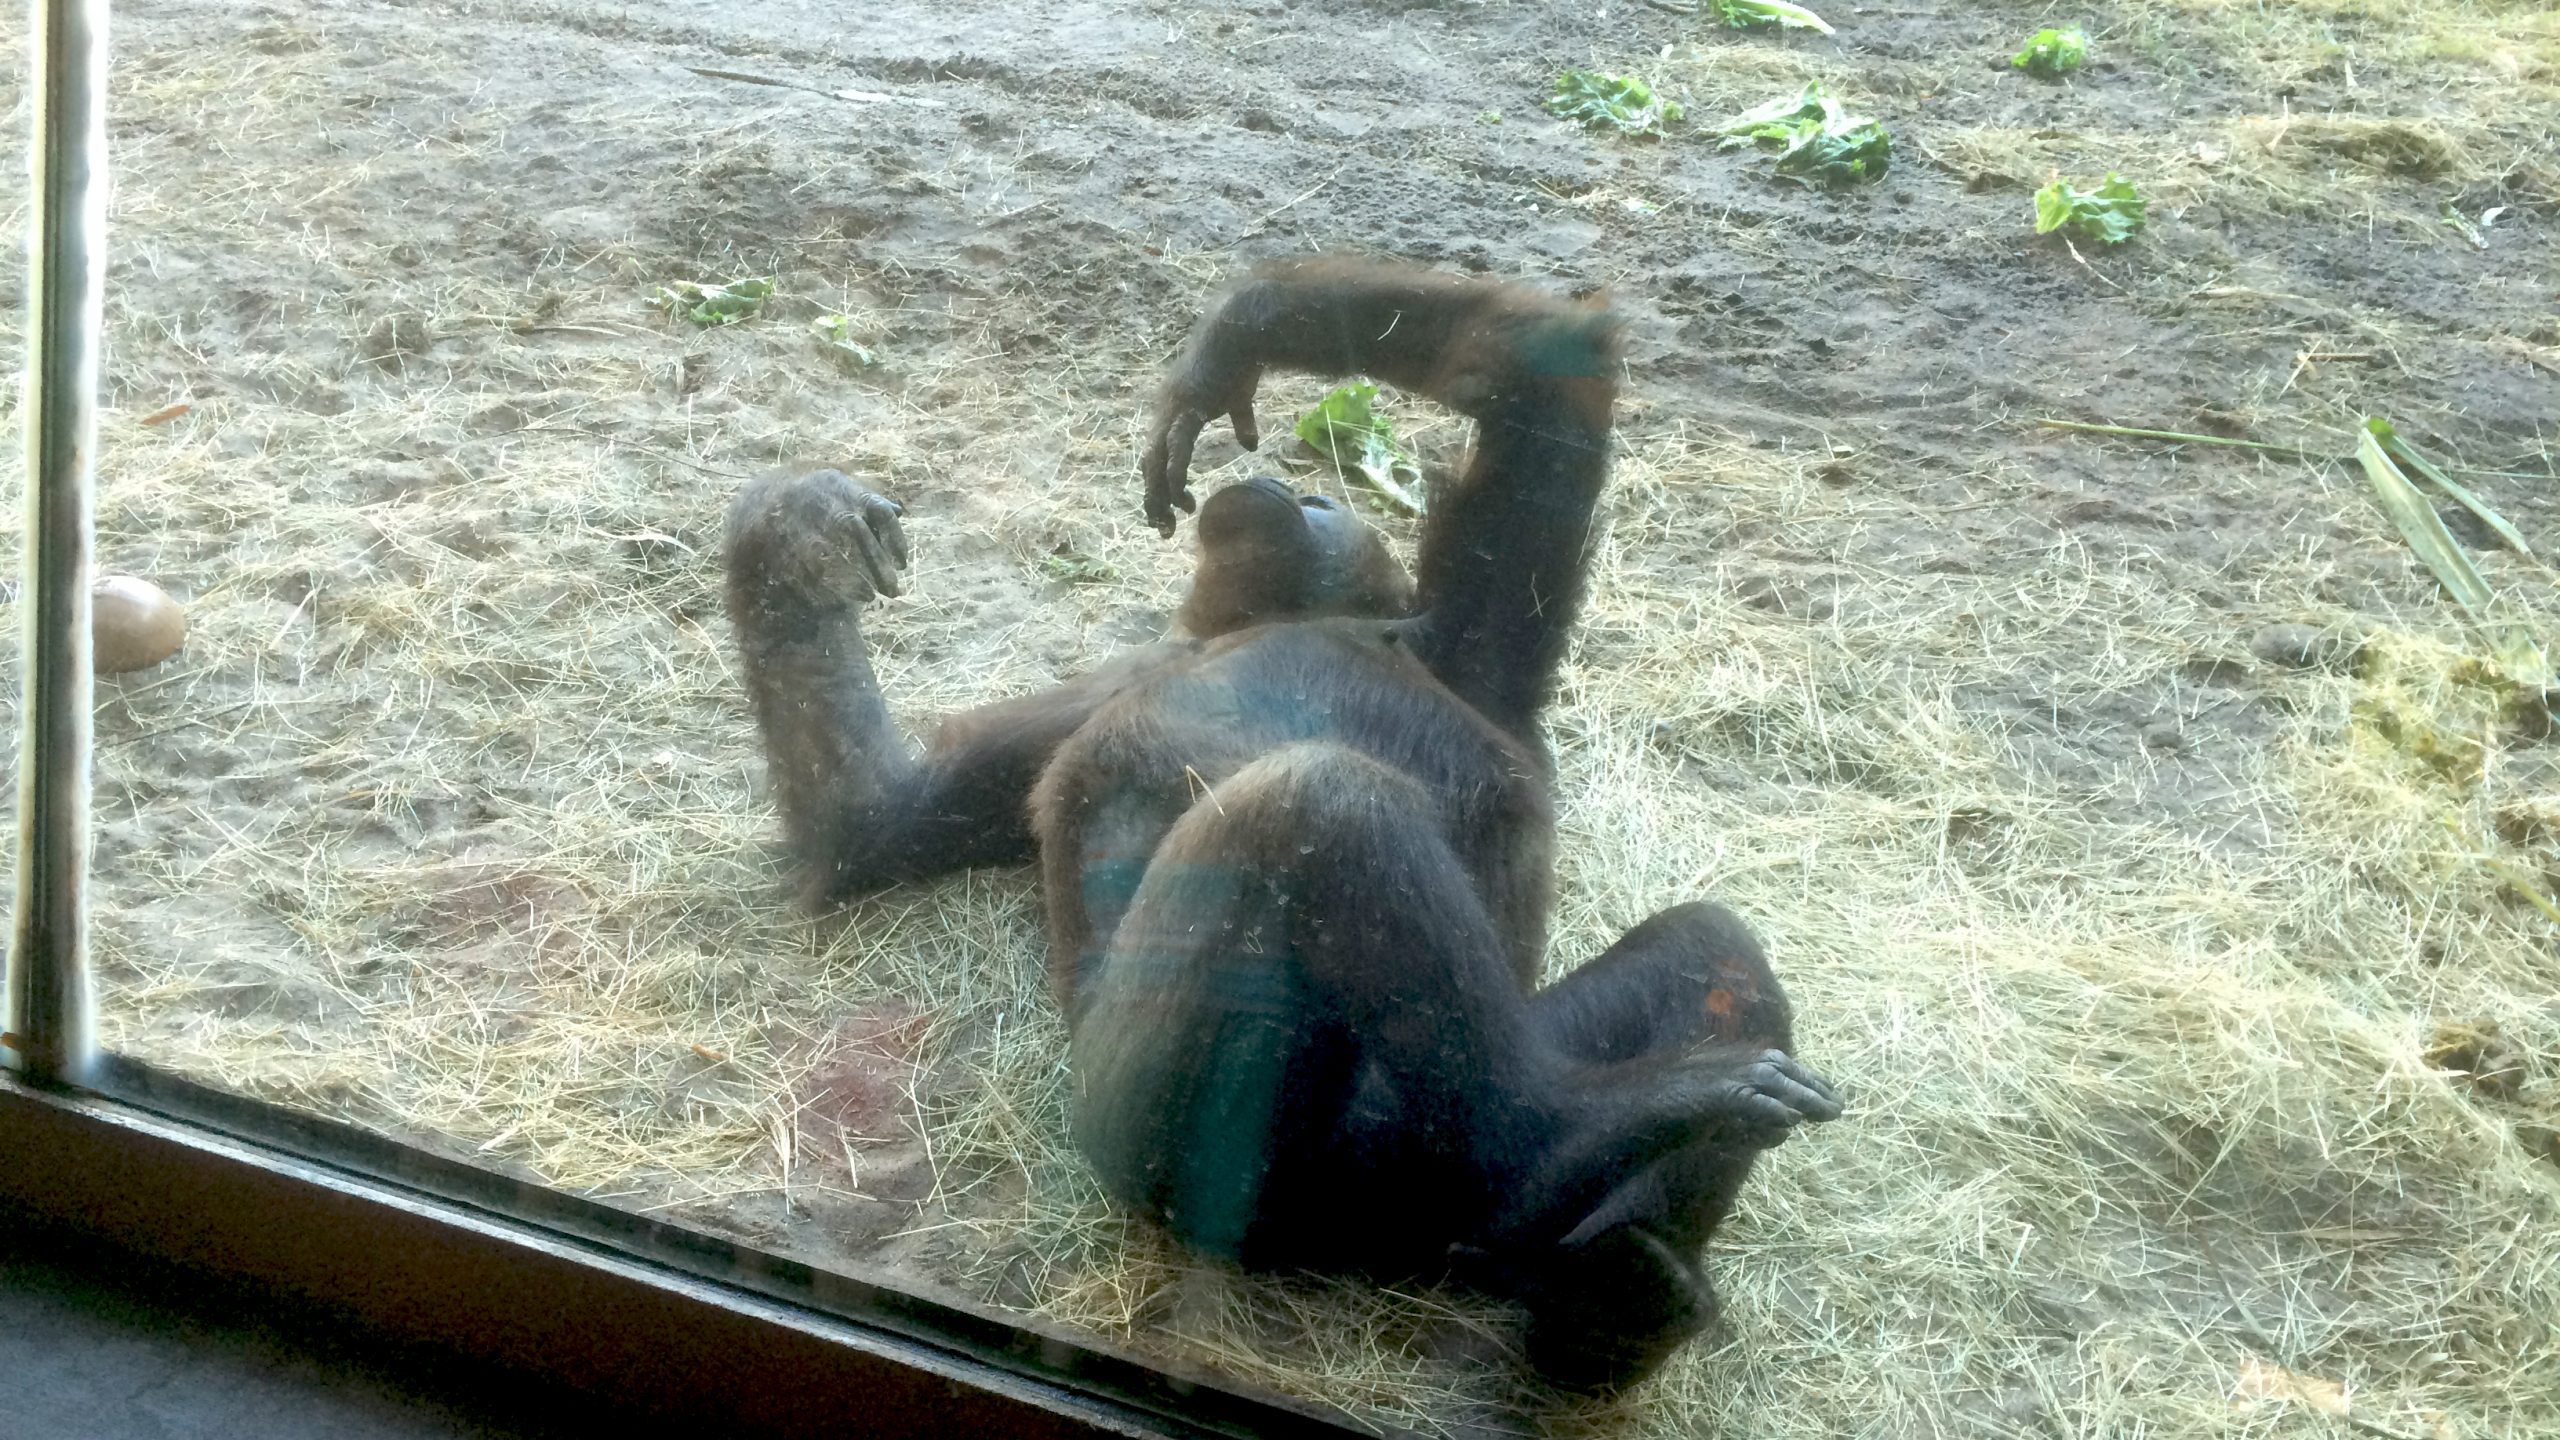 Gorillas hang out right on the other side of the glass